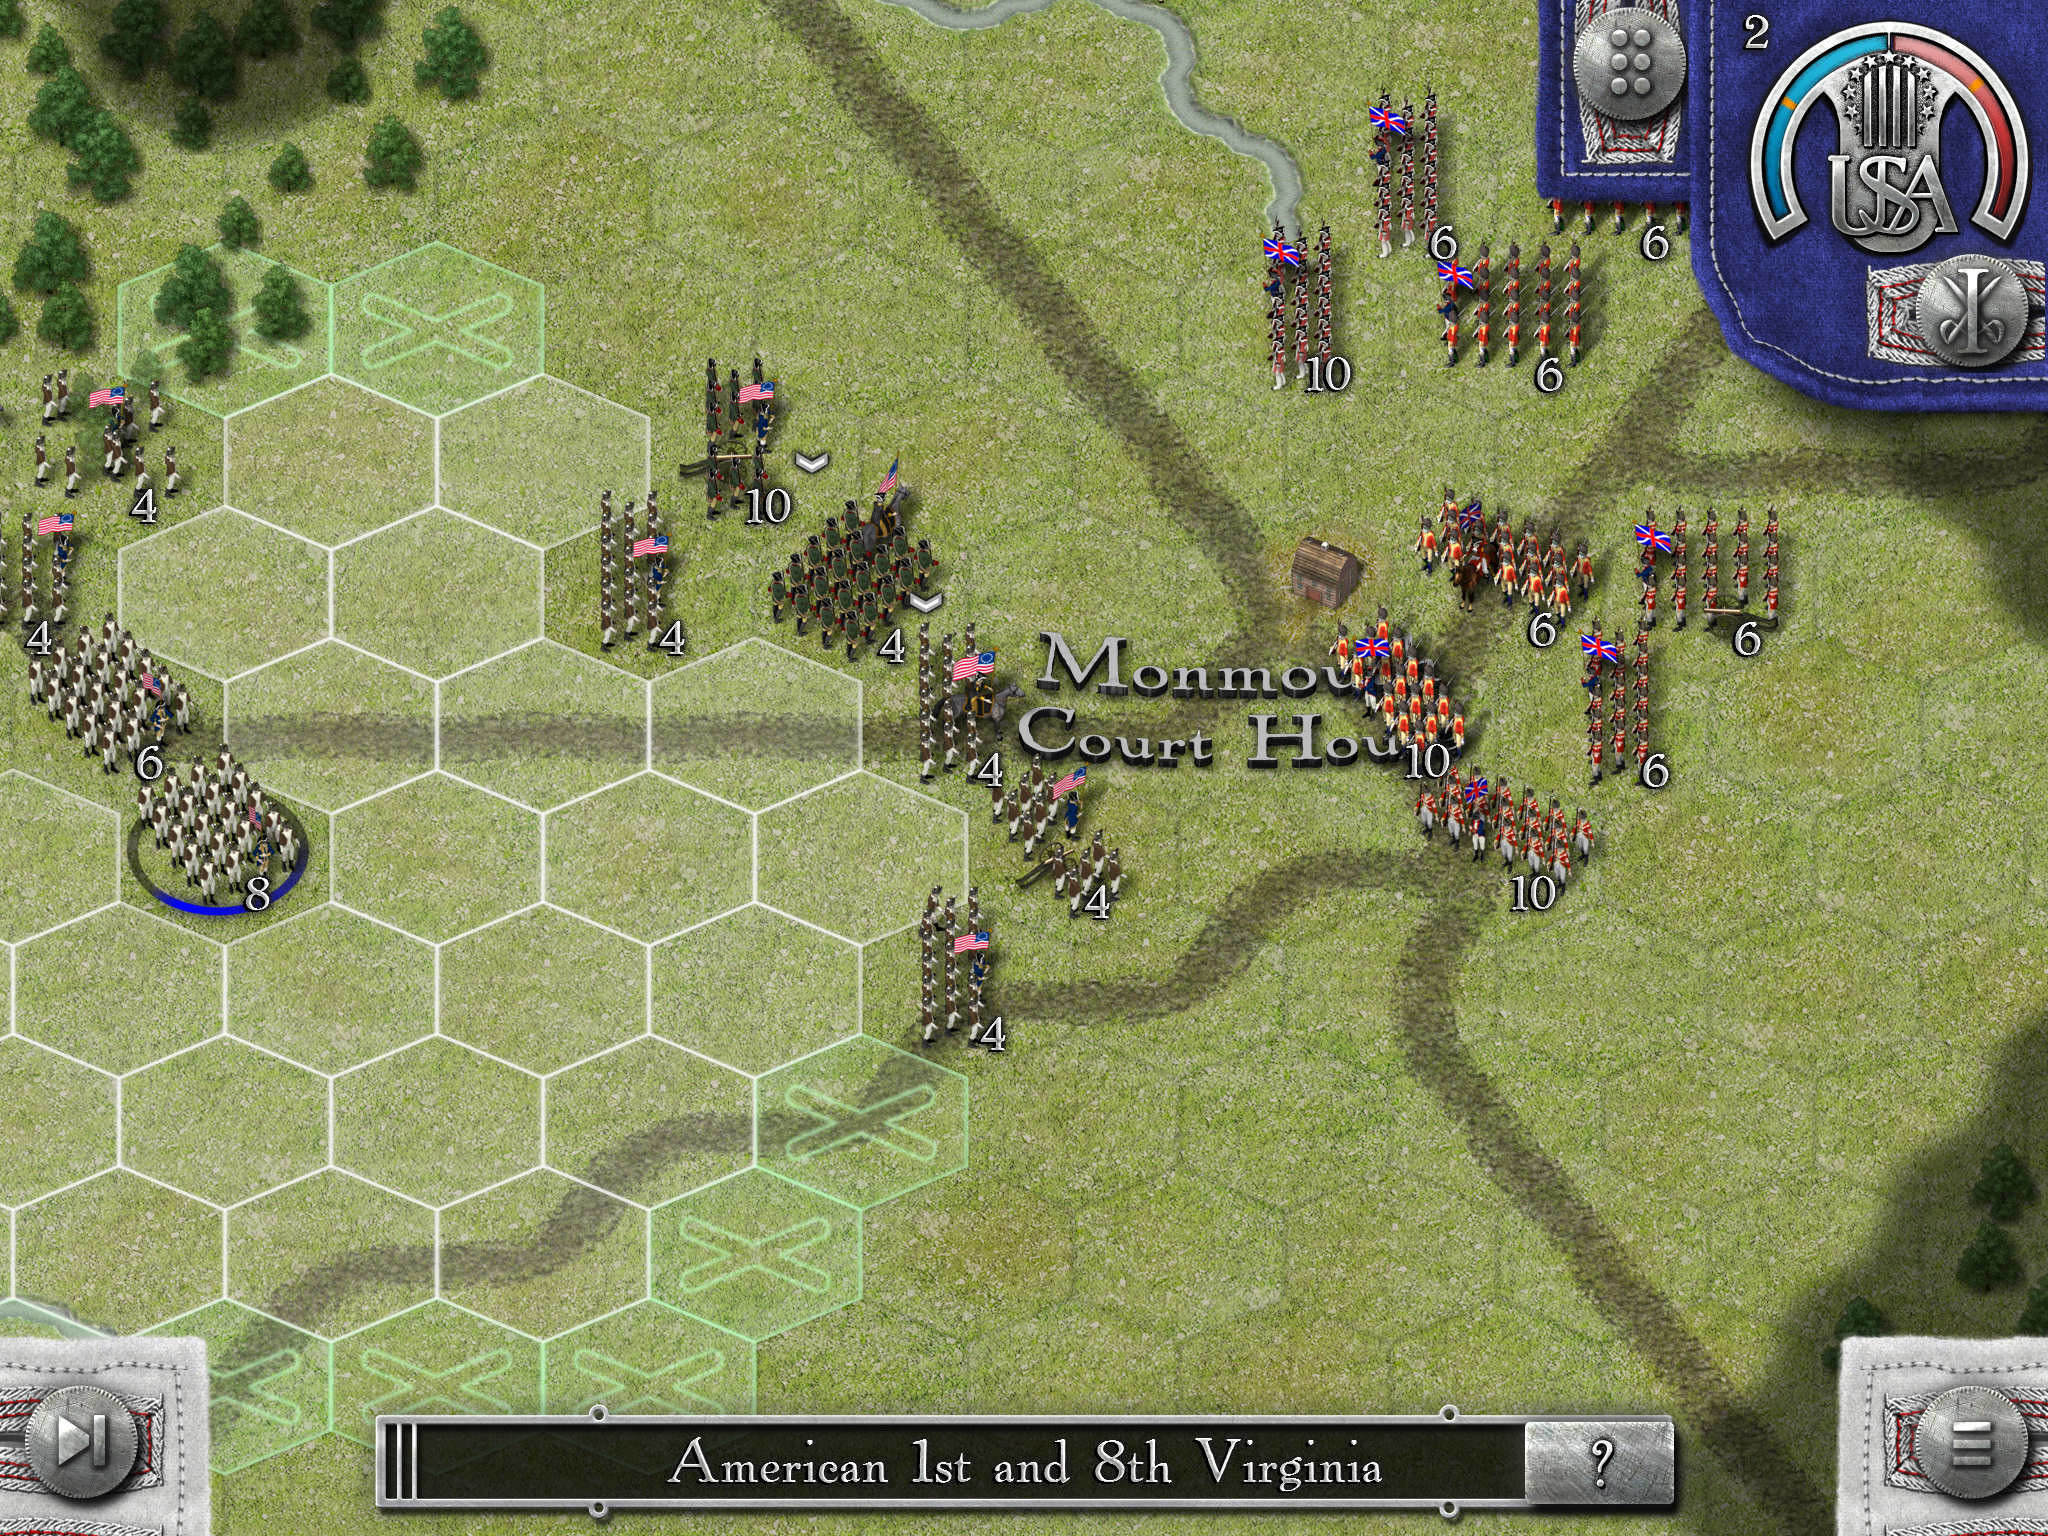 2048x1536 Some much needed R&R: American Revolution wargame Rebels & Redcoats  out on iOS next week | Pocket Tactics